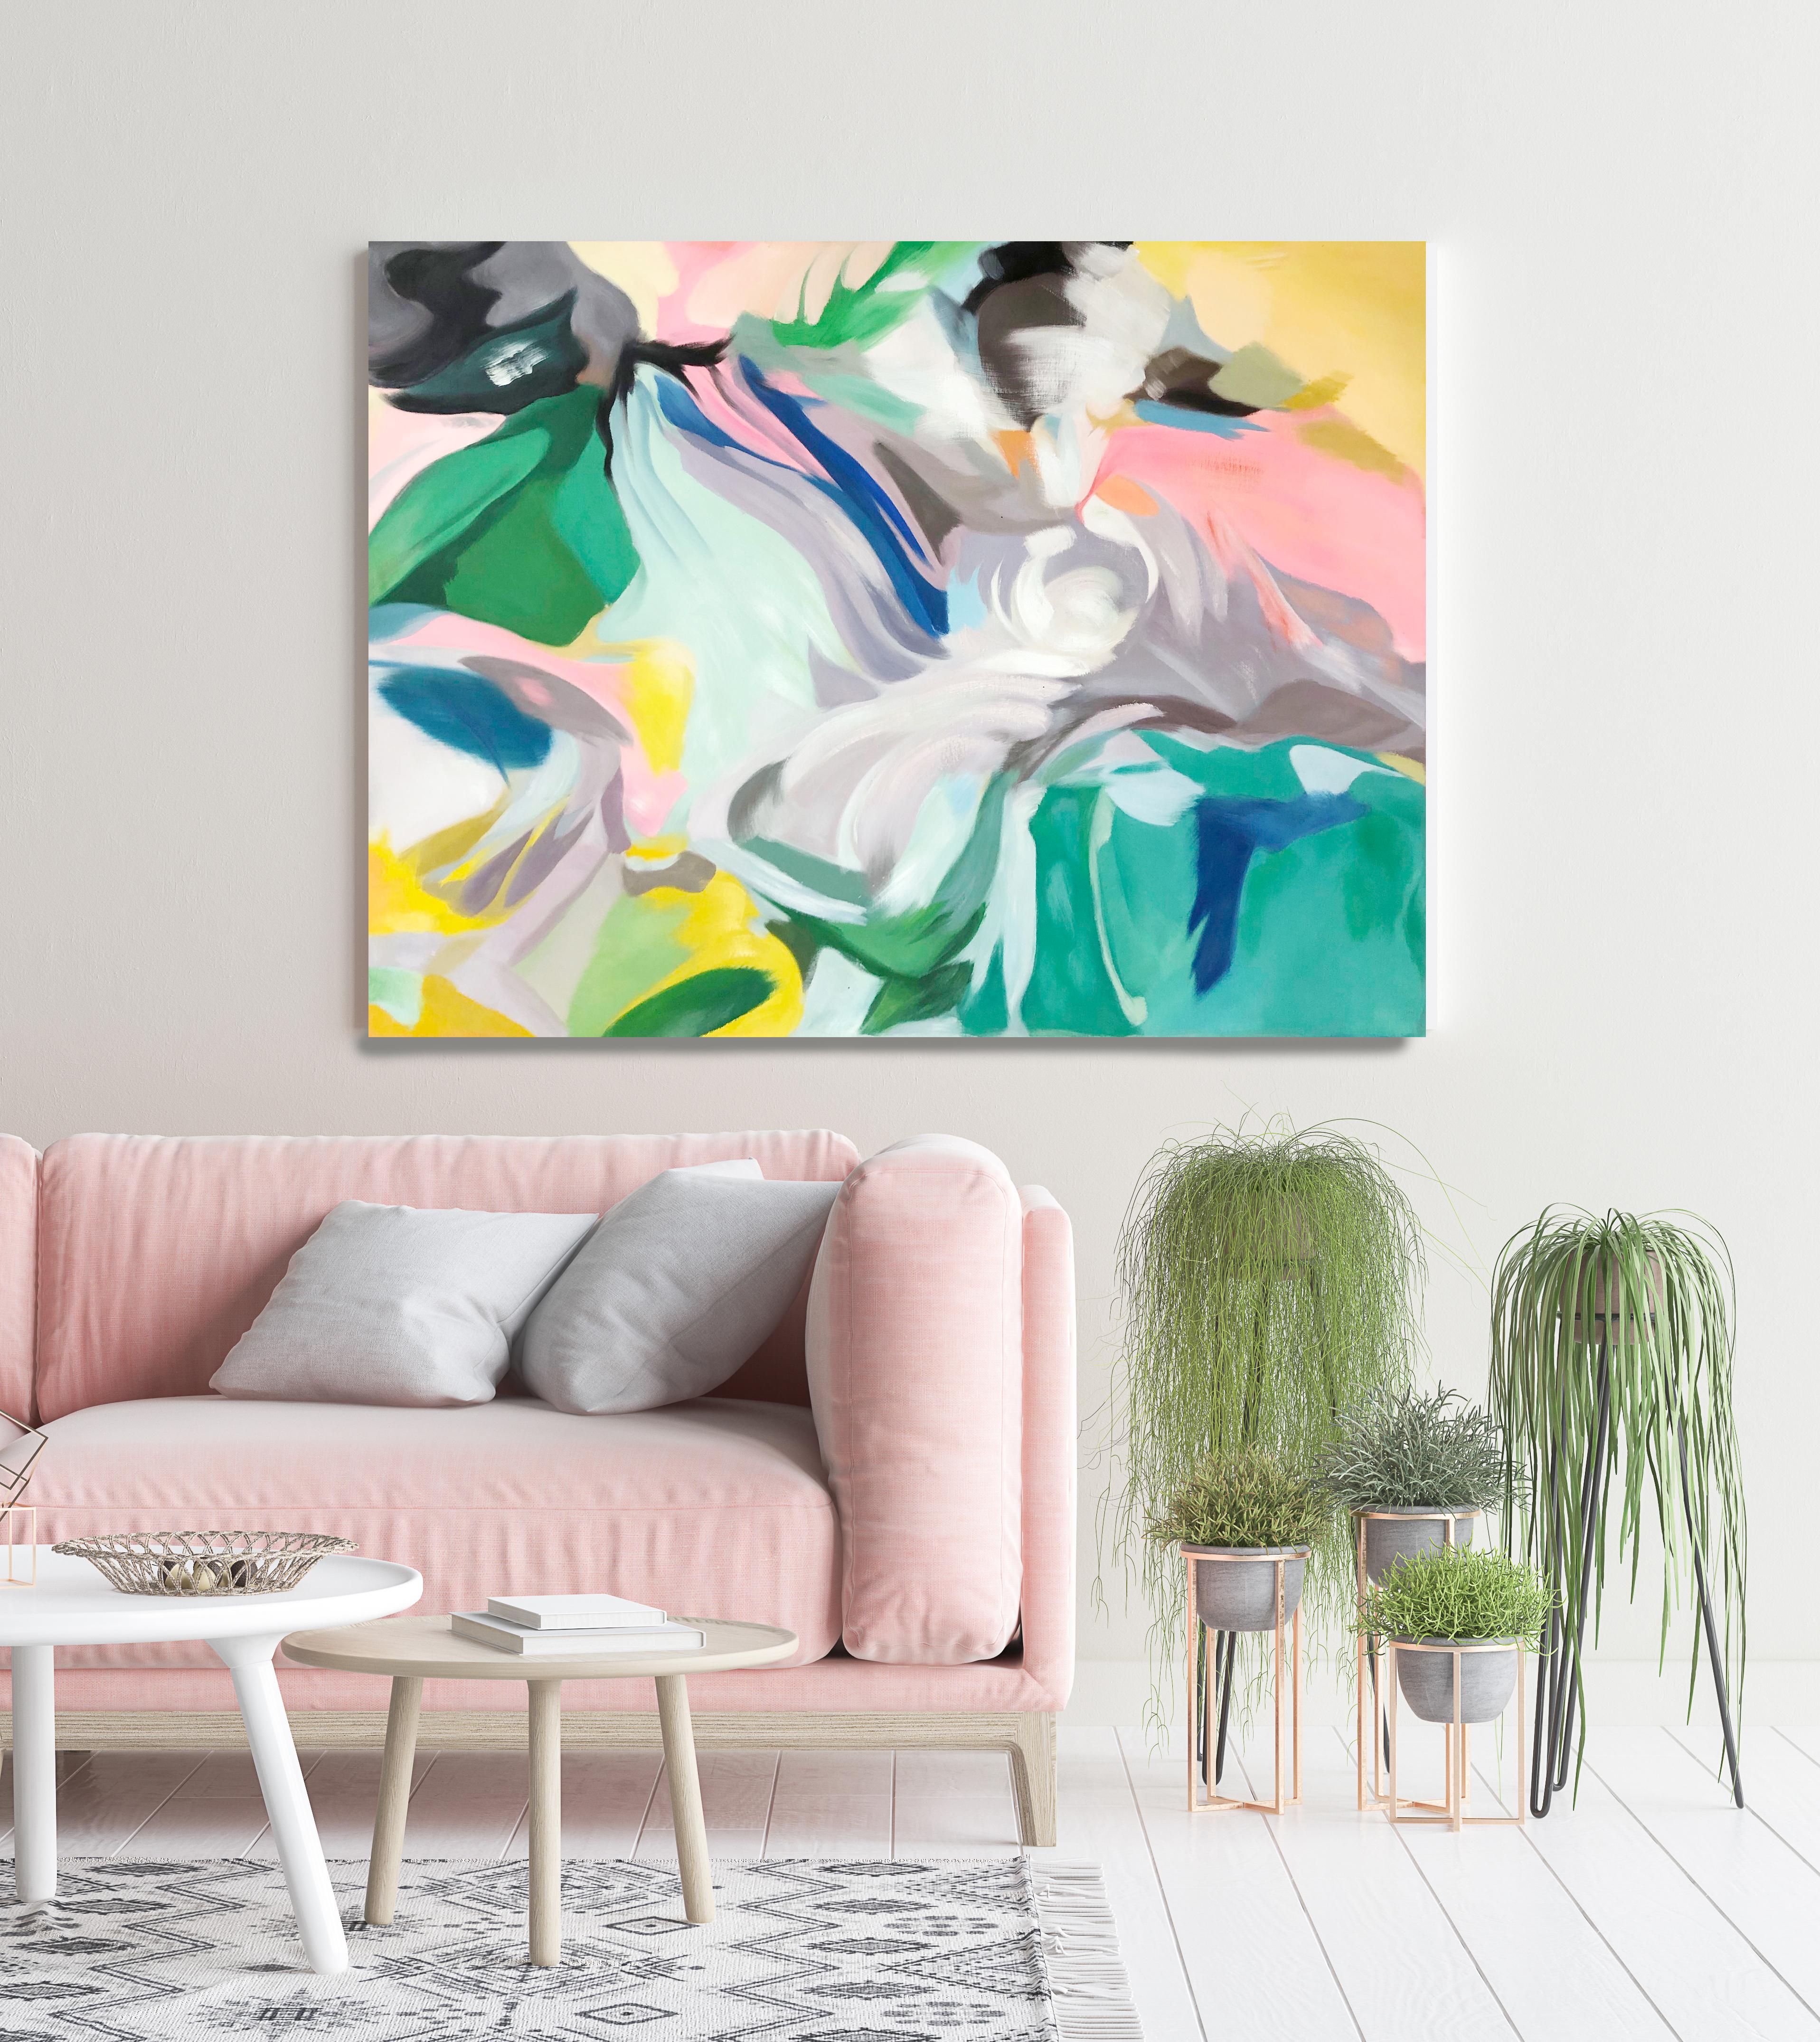 Irena Orlov Interior Painting - Teal Pink Blue Contemporary Abstract Acrylic Painting, 48W X 36"H Sympathy